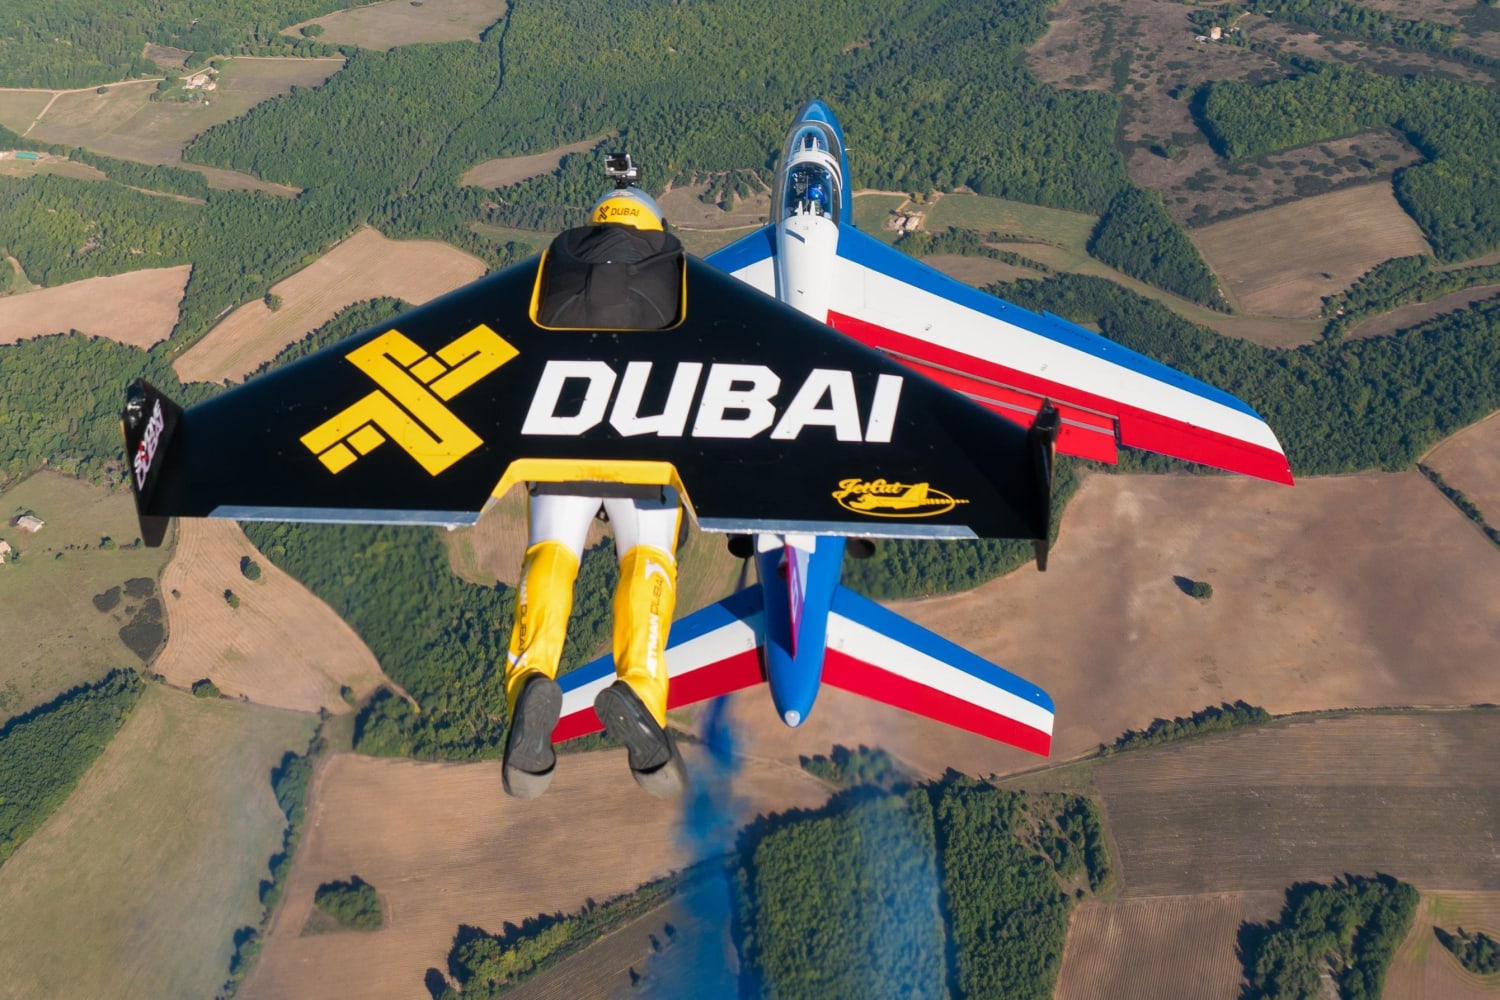 Watch three guys with jetpacks fly in formation with airplanes